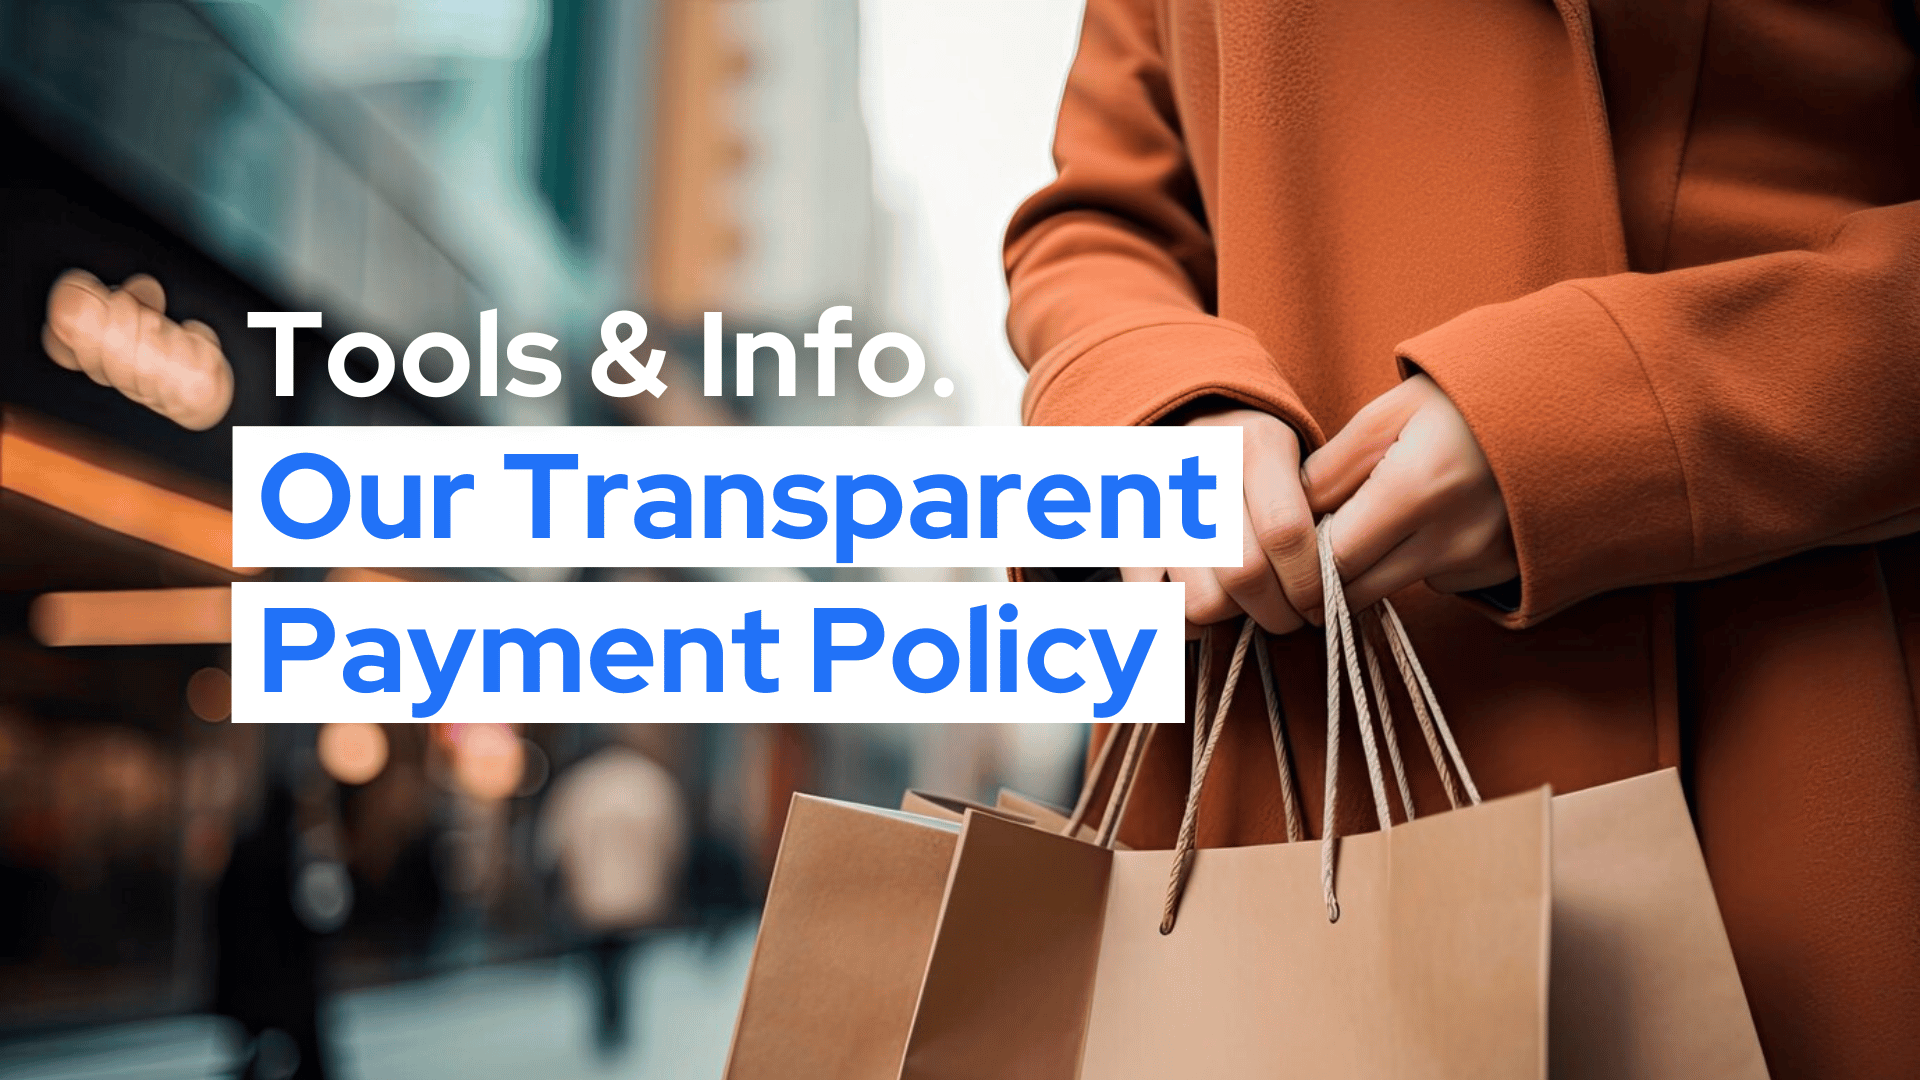 Our Transparent Payment Policy: Read how we keep payments, refunds, and fees simple and straightforward. No Interest and no hidden fees.